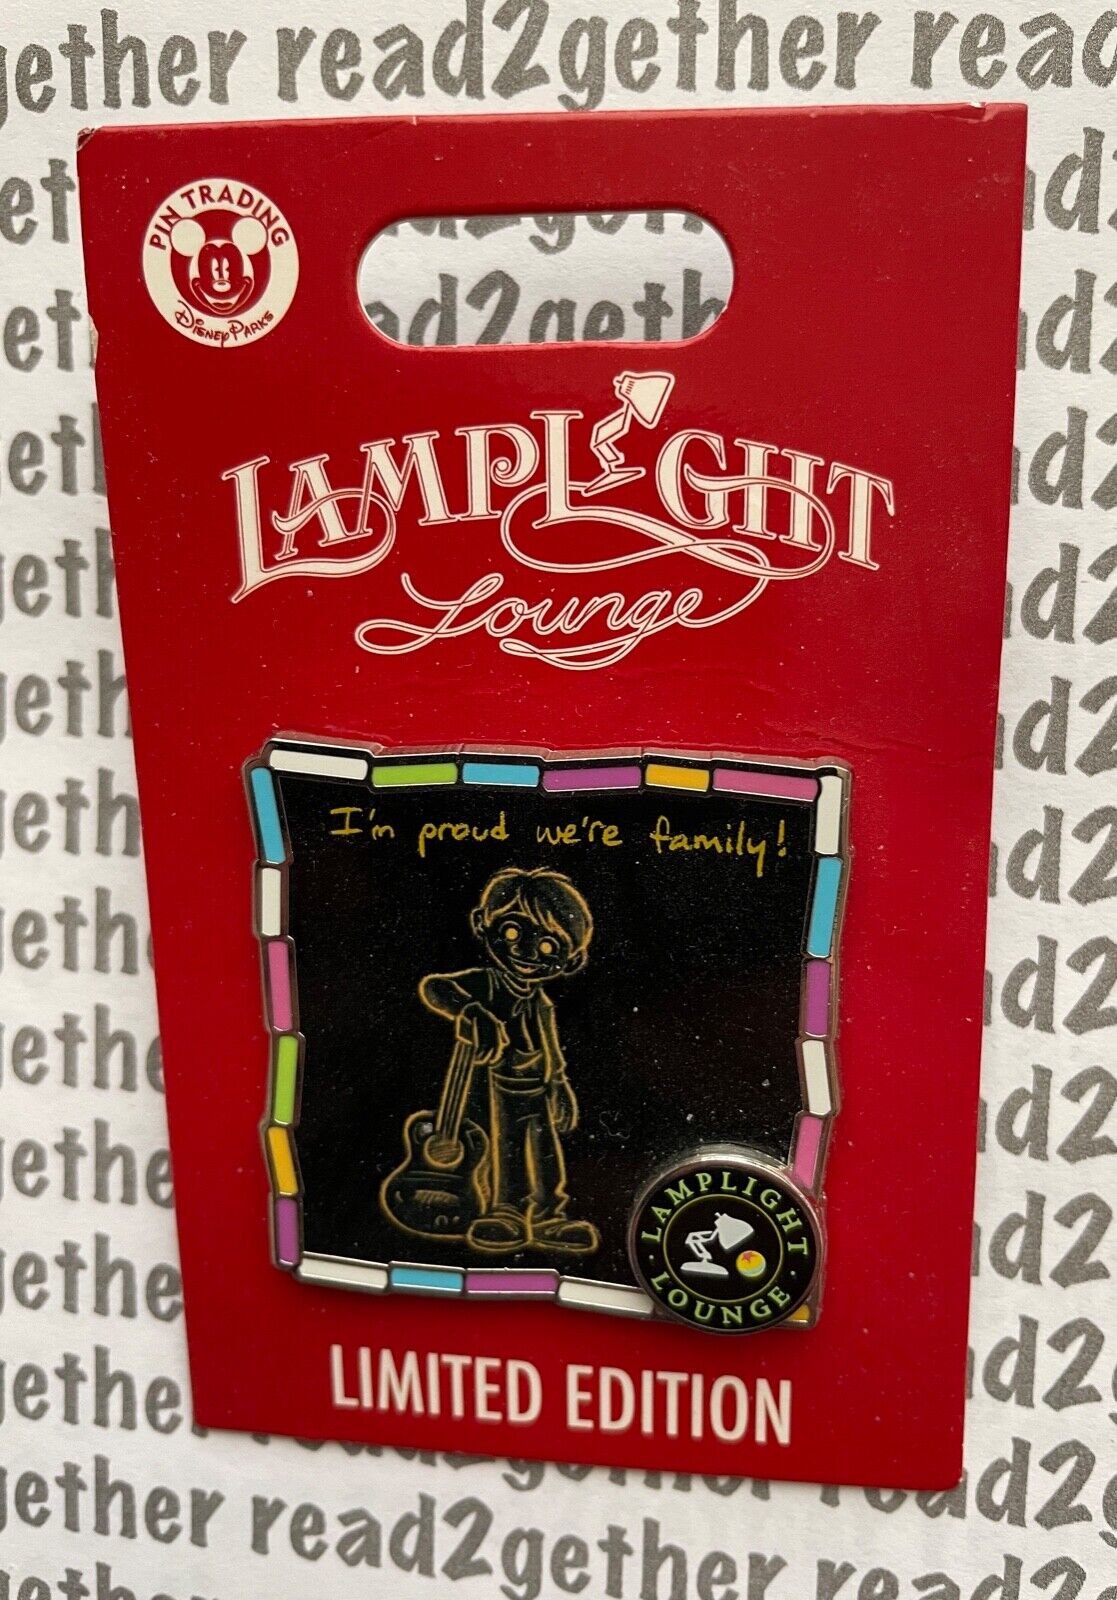 Disney Pin Coco Lamplight Lounge Miguel I'm proud we're family